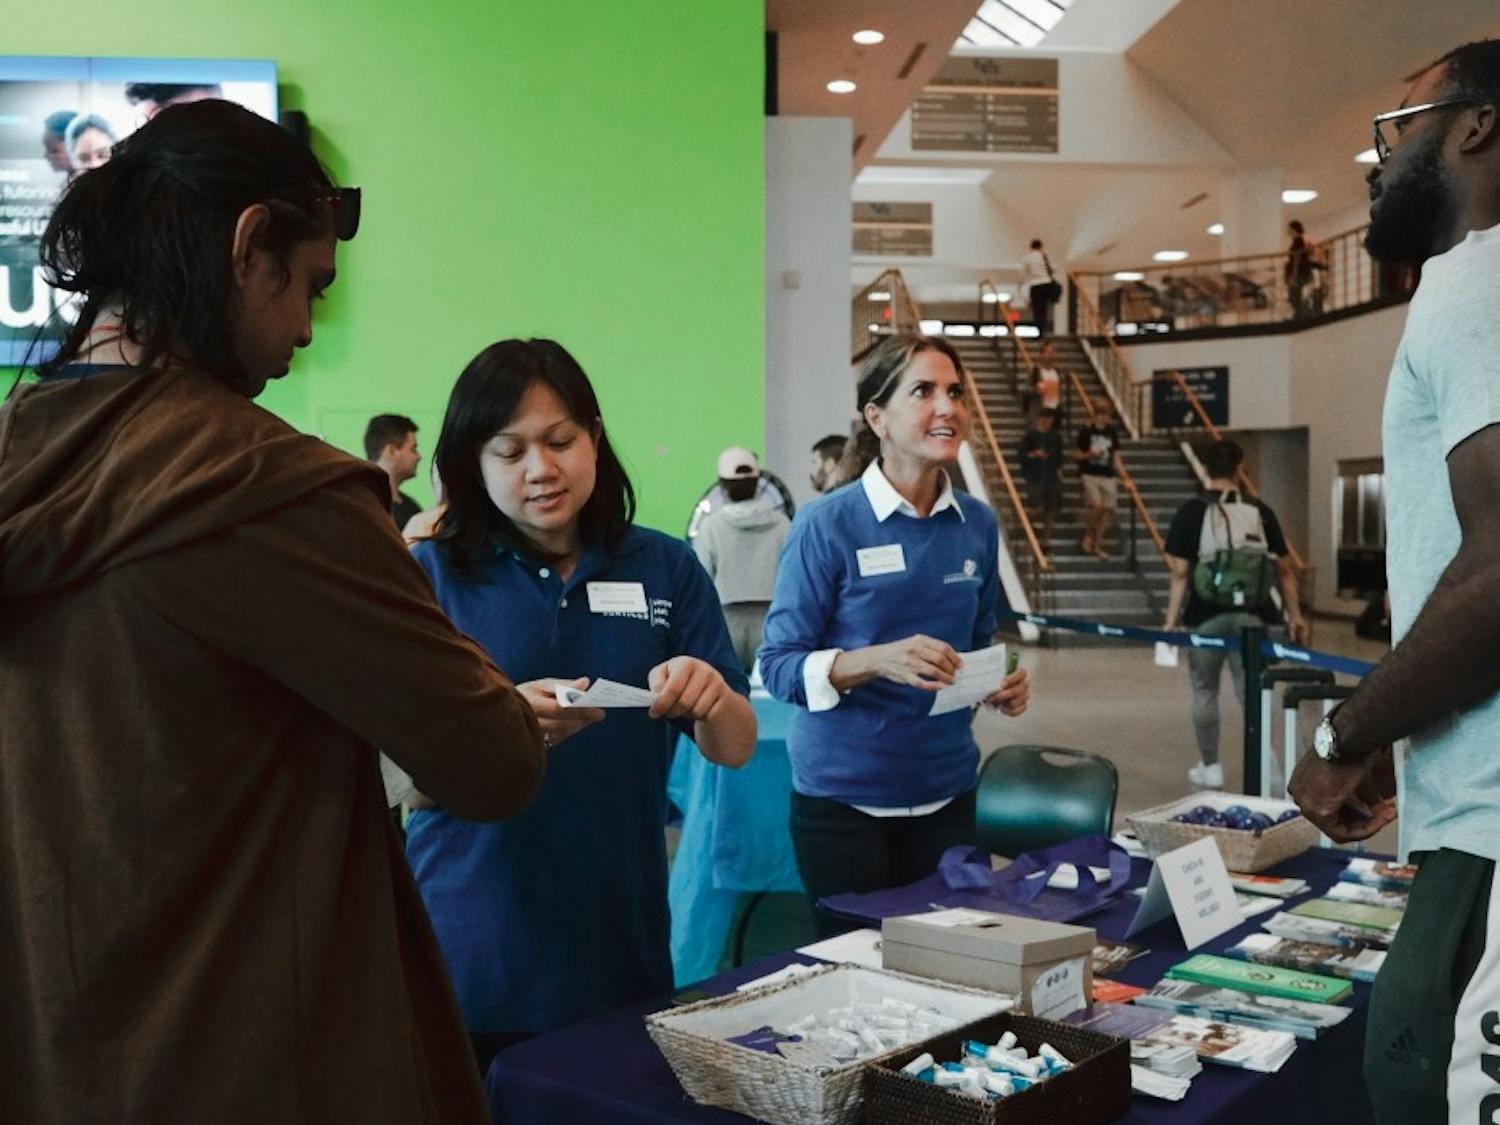 Student check-in during UB’s Tuesday event for National Suicide Prevention week.